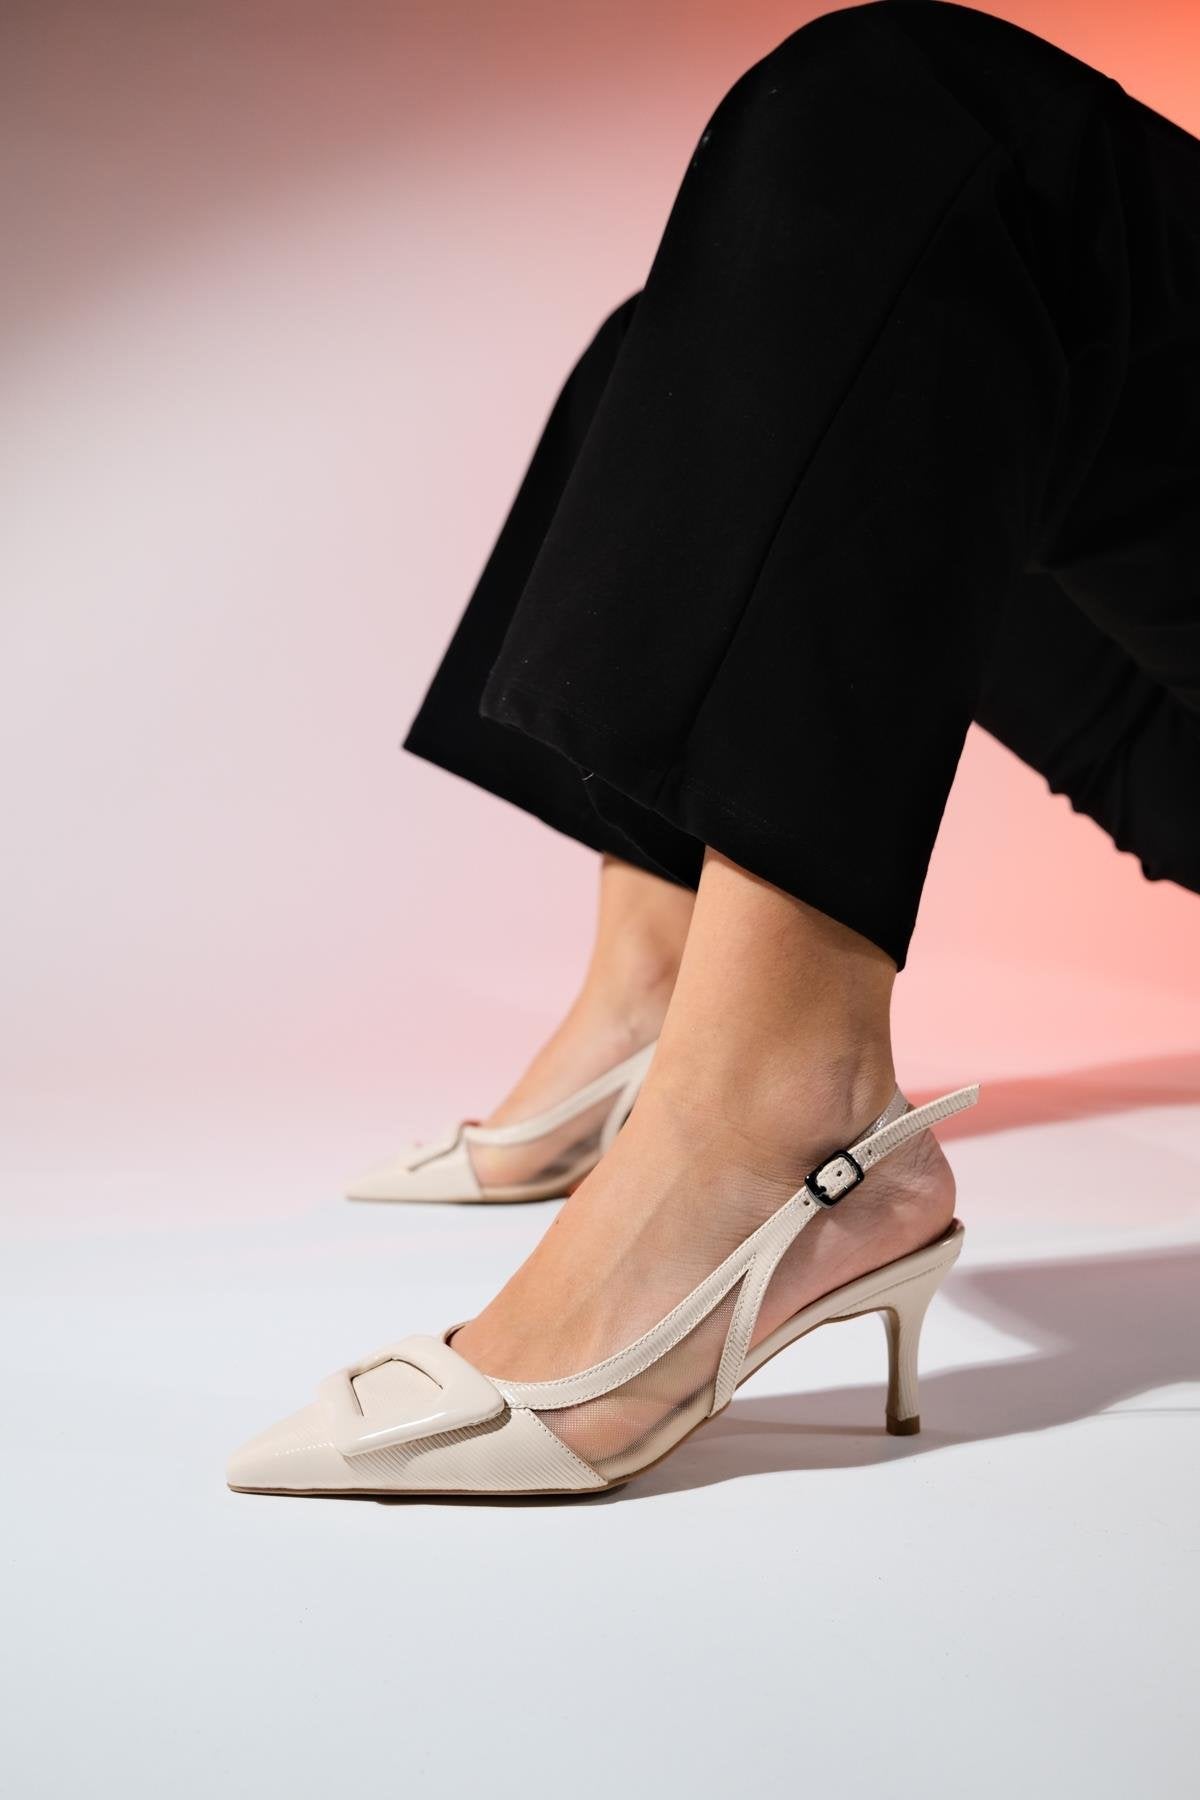 FOLEY Beige Patent Leather Striped Women's Pointed Toe Open Back Thin Heeled Shoes - Lebbse